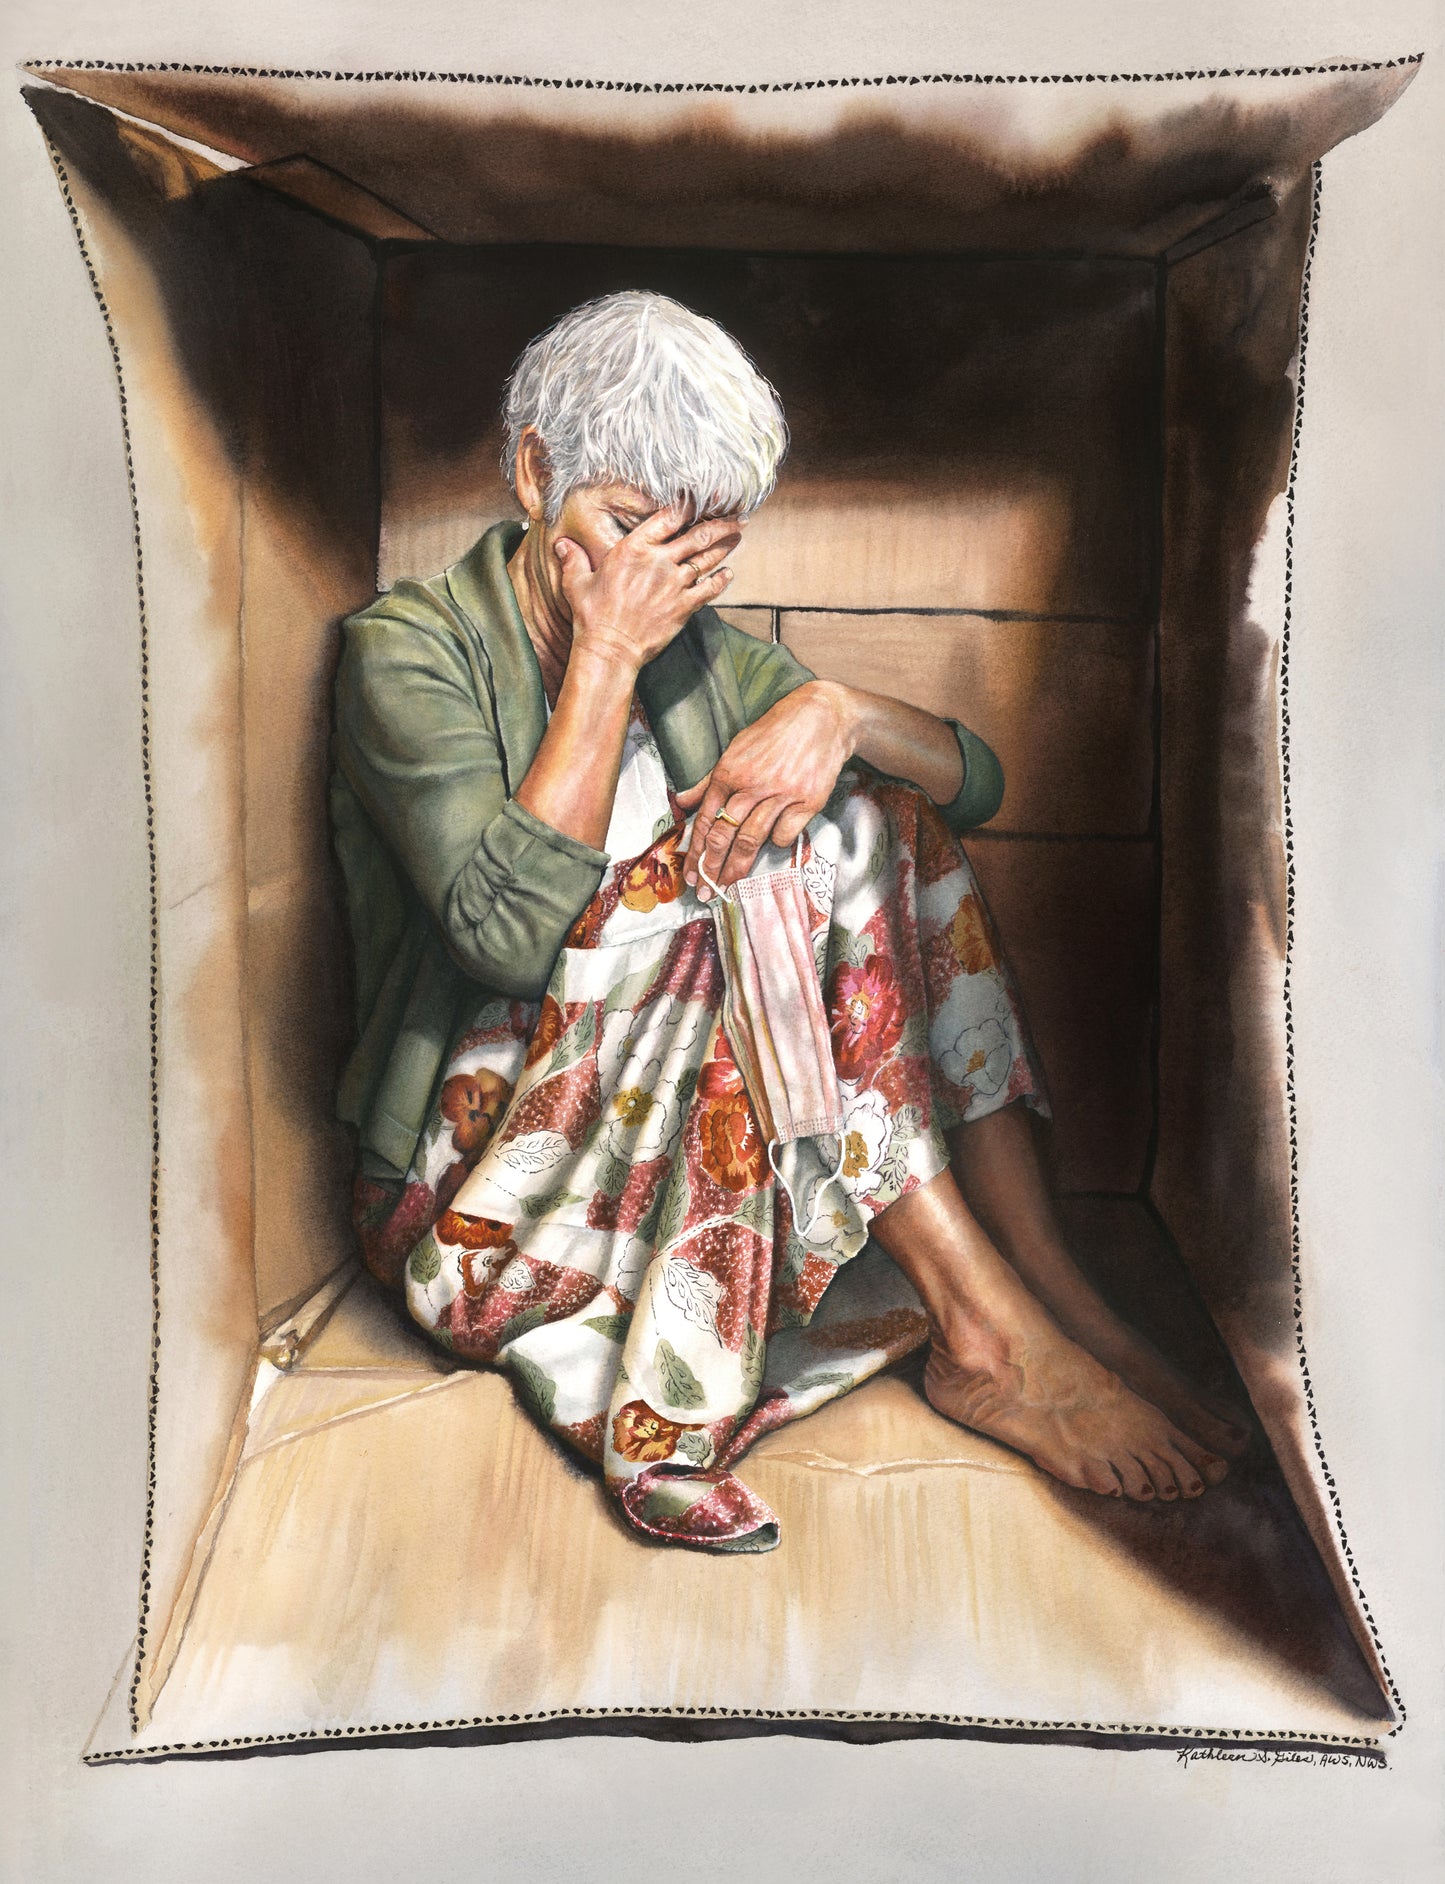 Original Watercolor Painting of "Life is Feeling Boxed In"